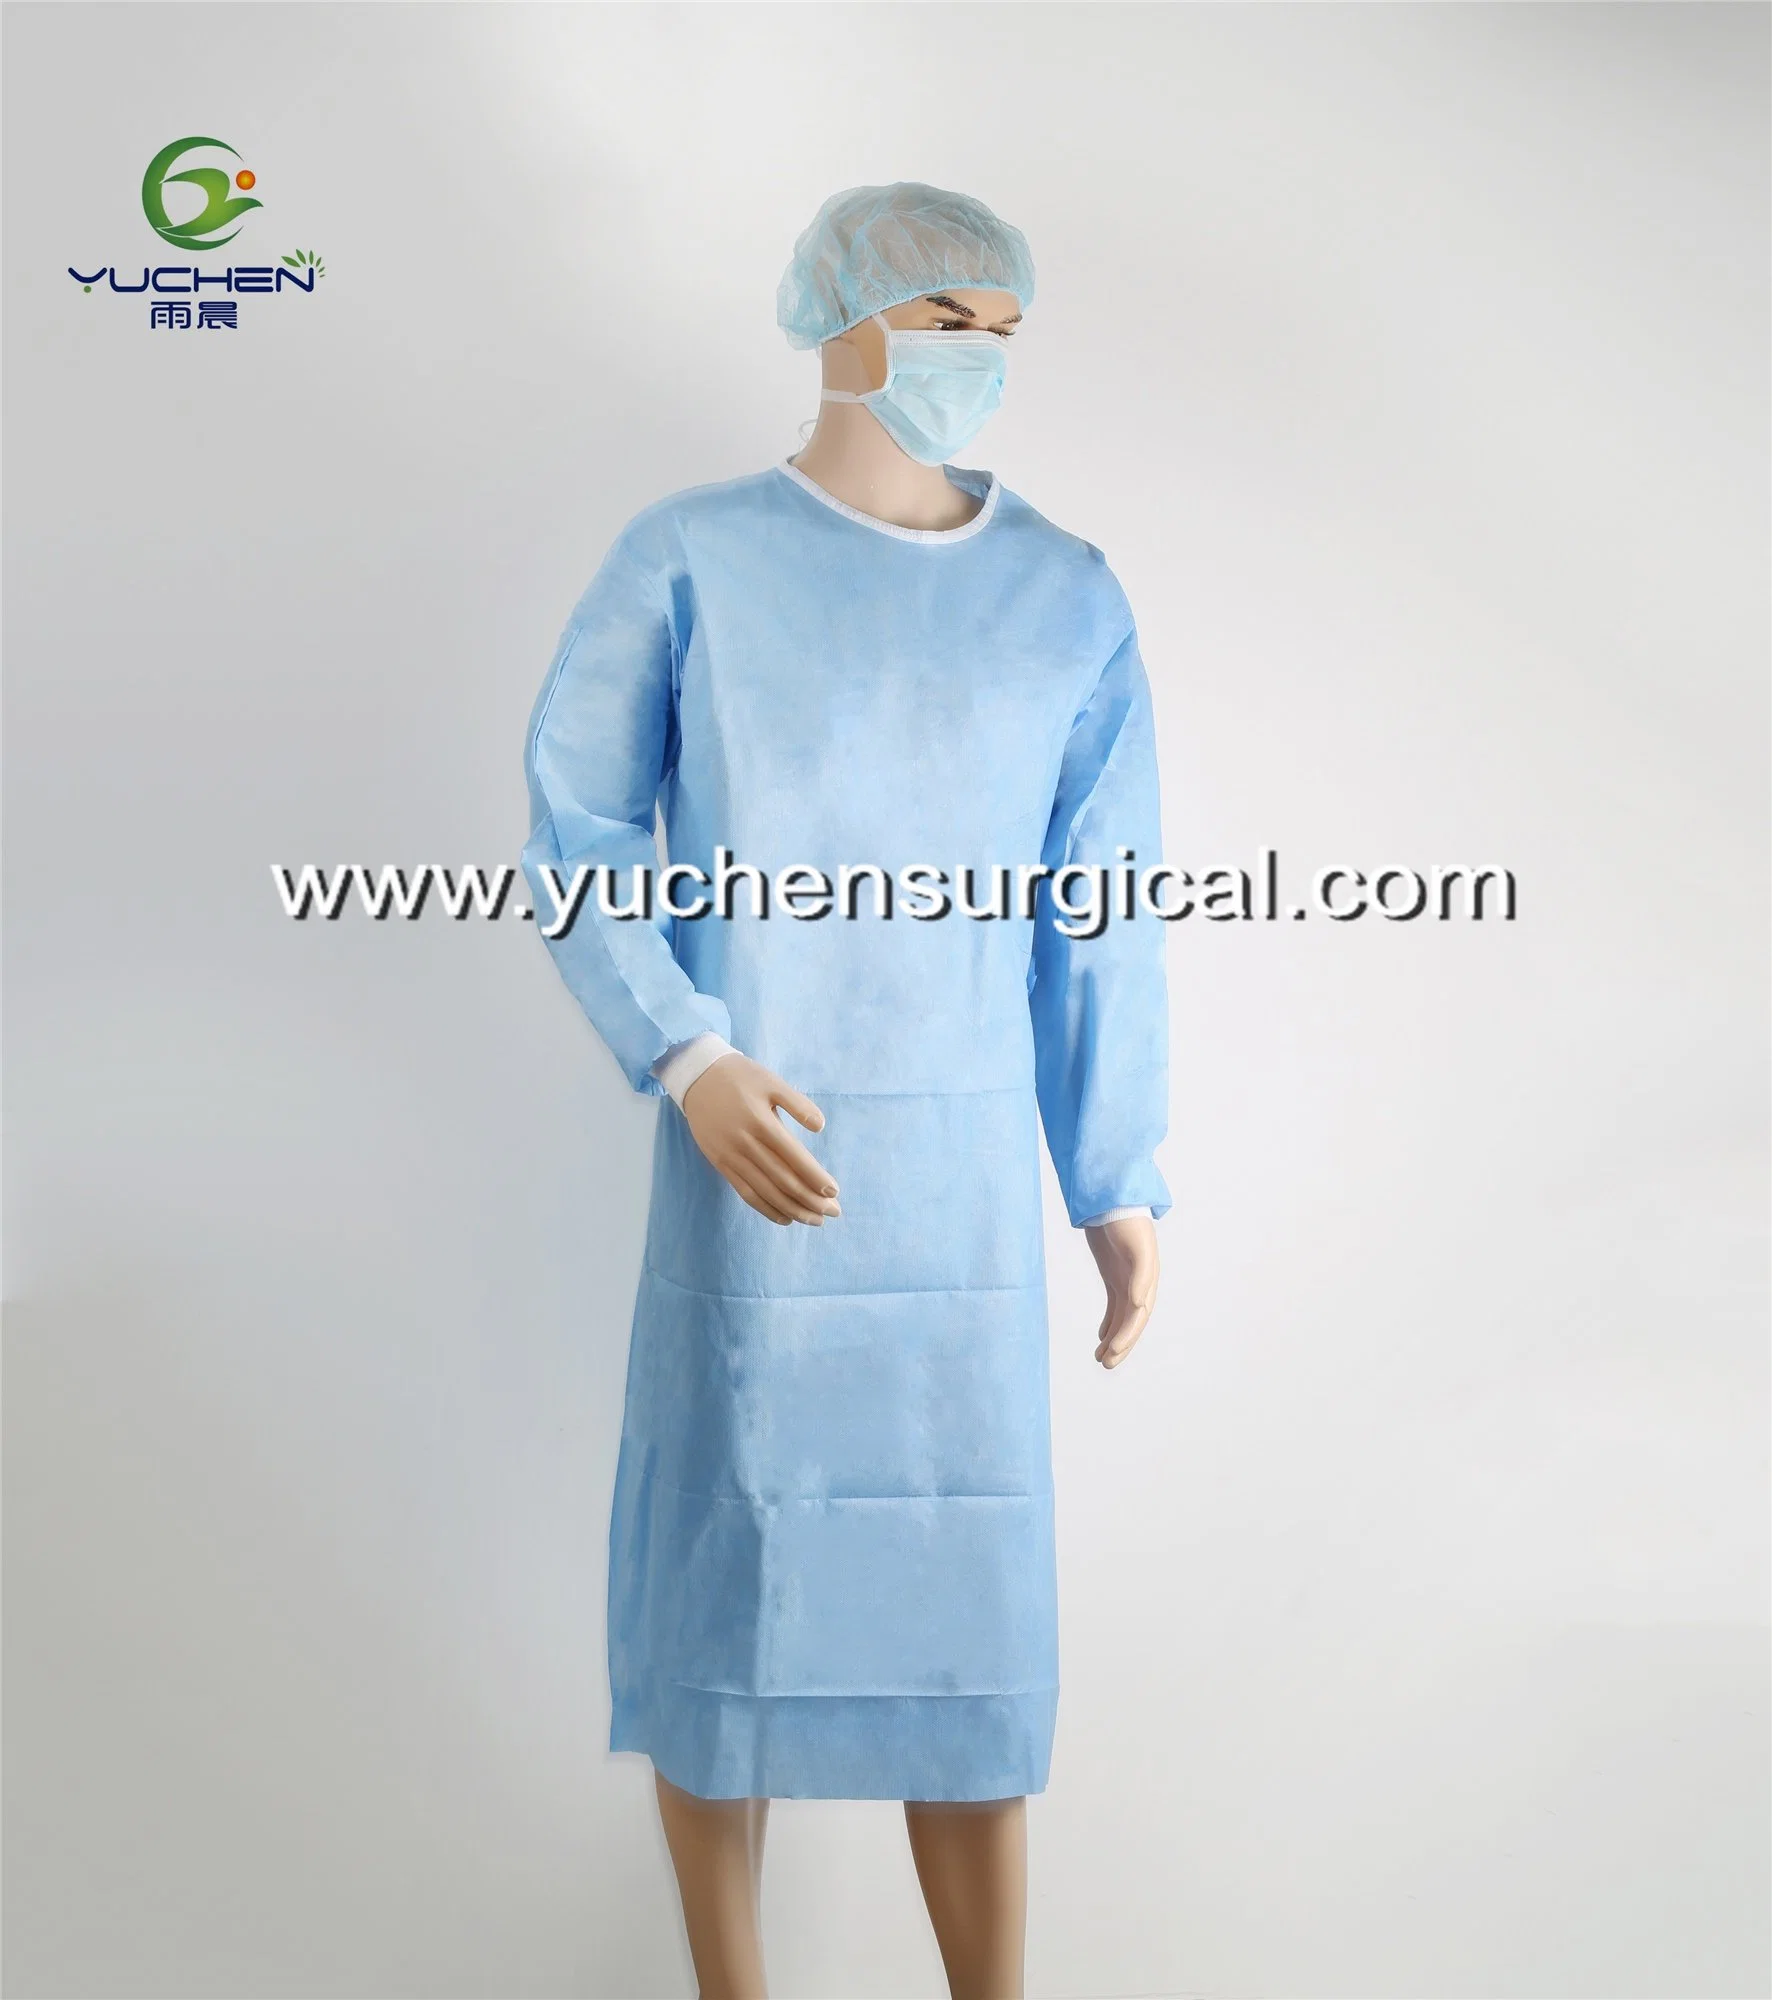 SMS Knitted Cuff Standard Surgical Gown Disposable Surgical Gowns Surgeon Clothes